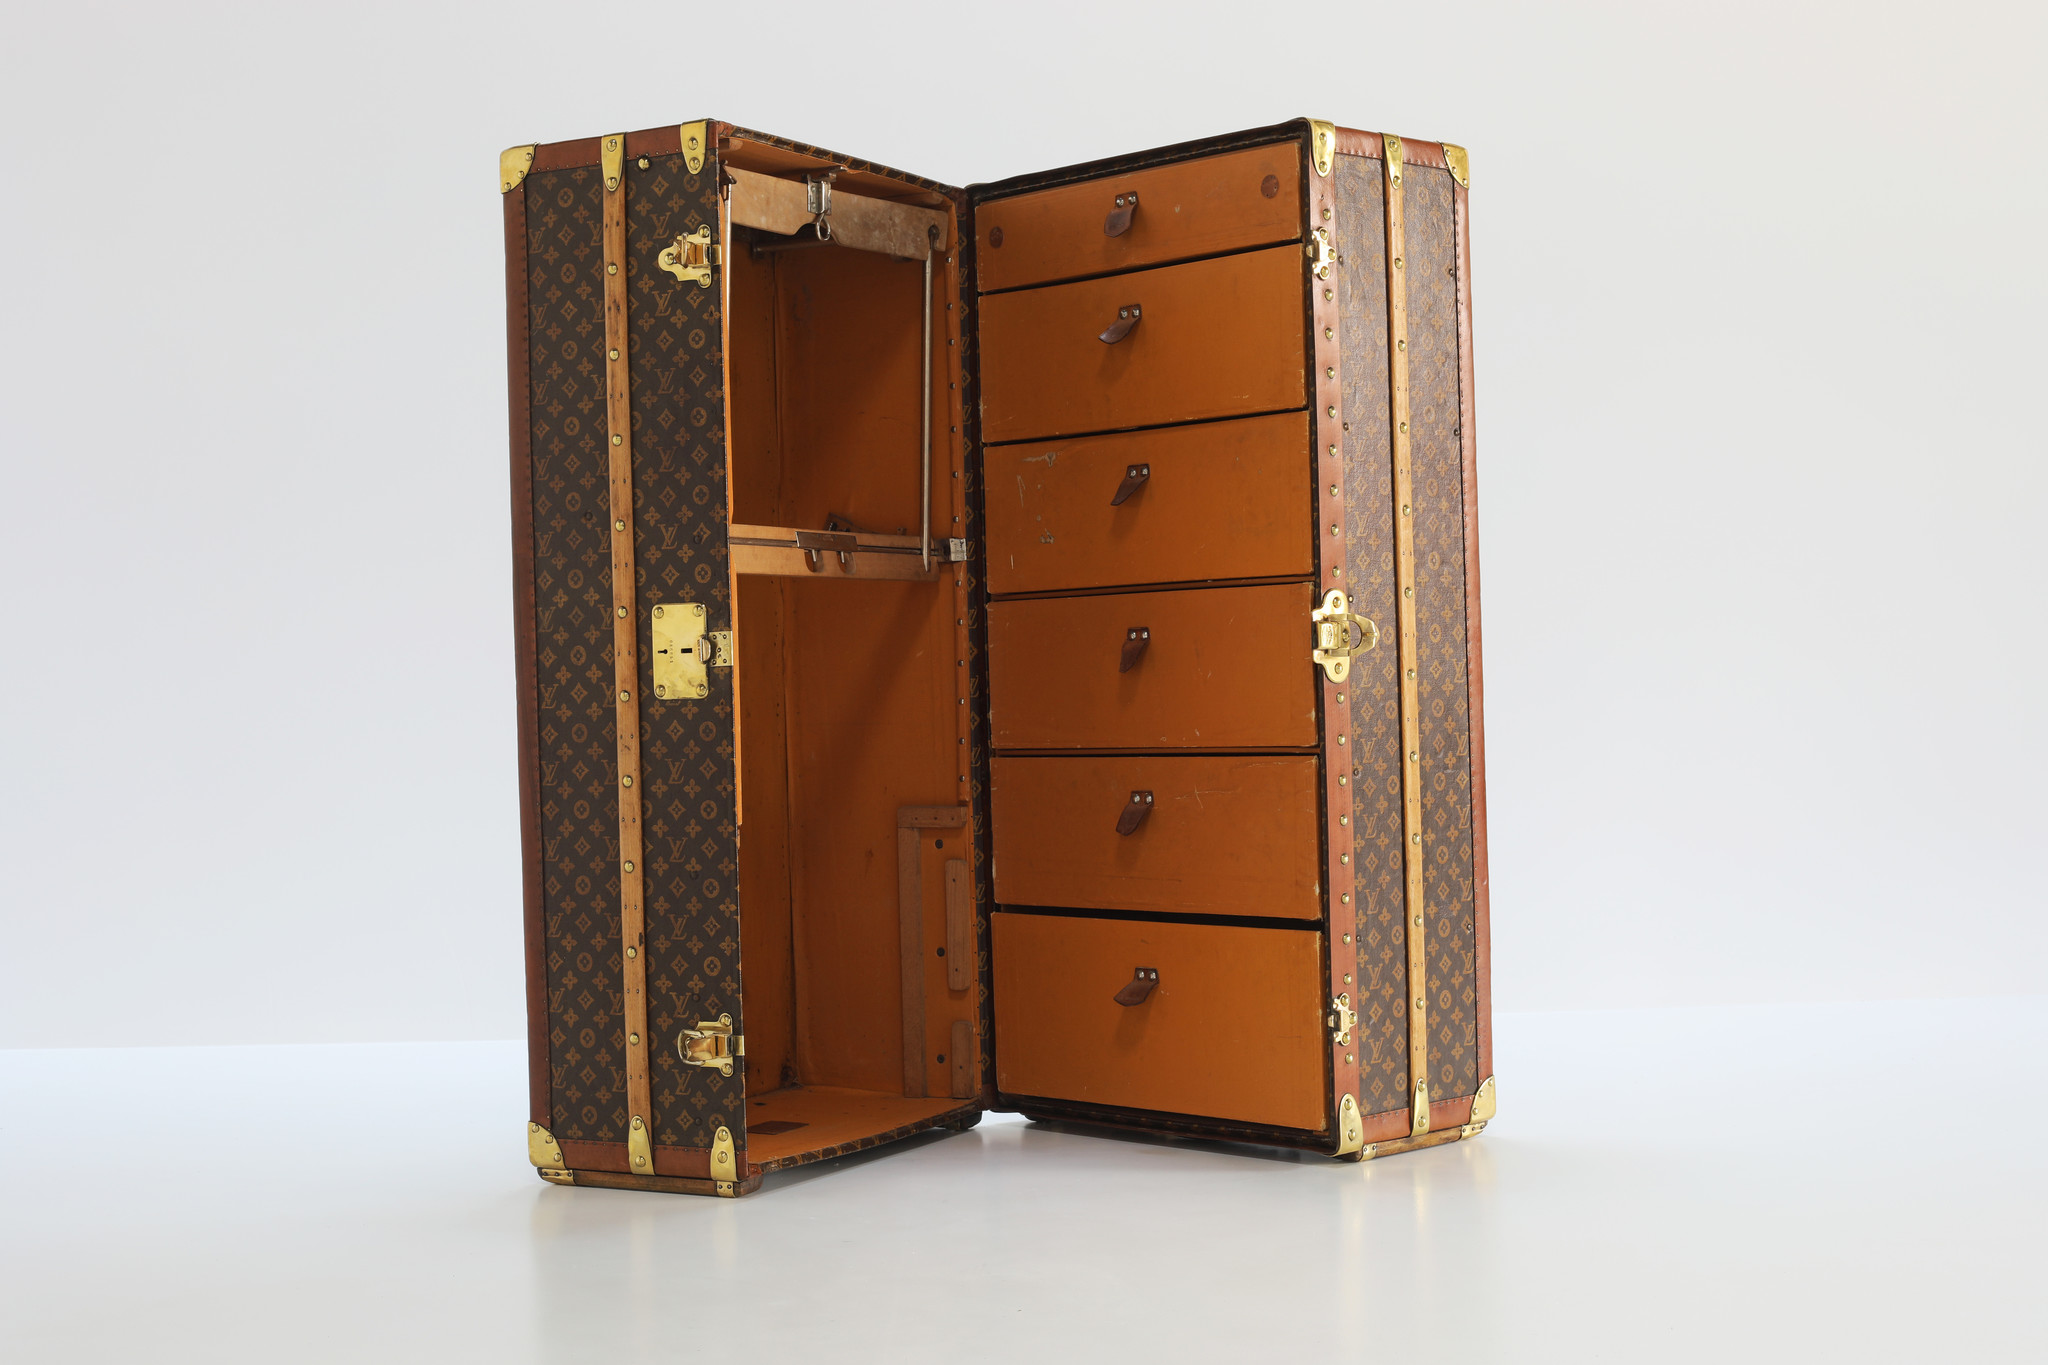 Louis Vuitton wardrobe, 1930s - THE HOUSE OF WAUW